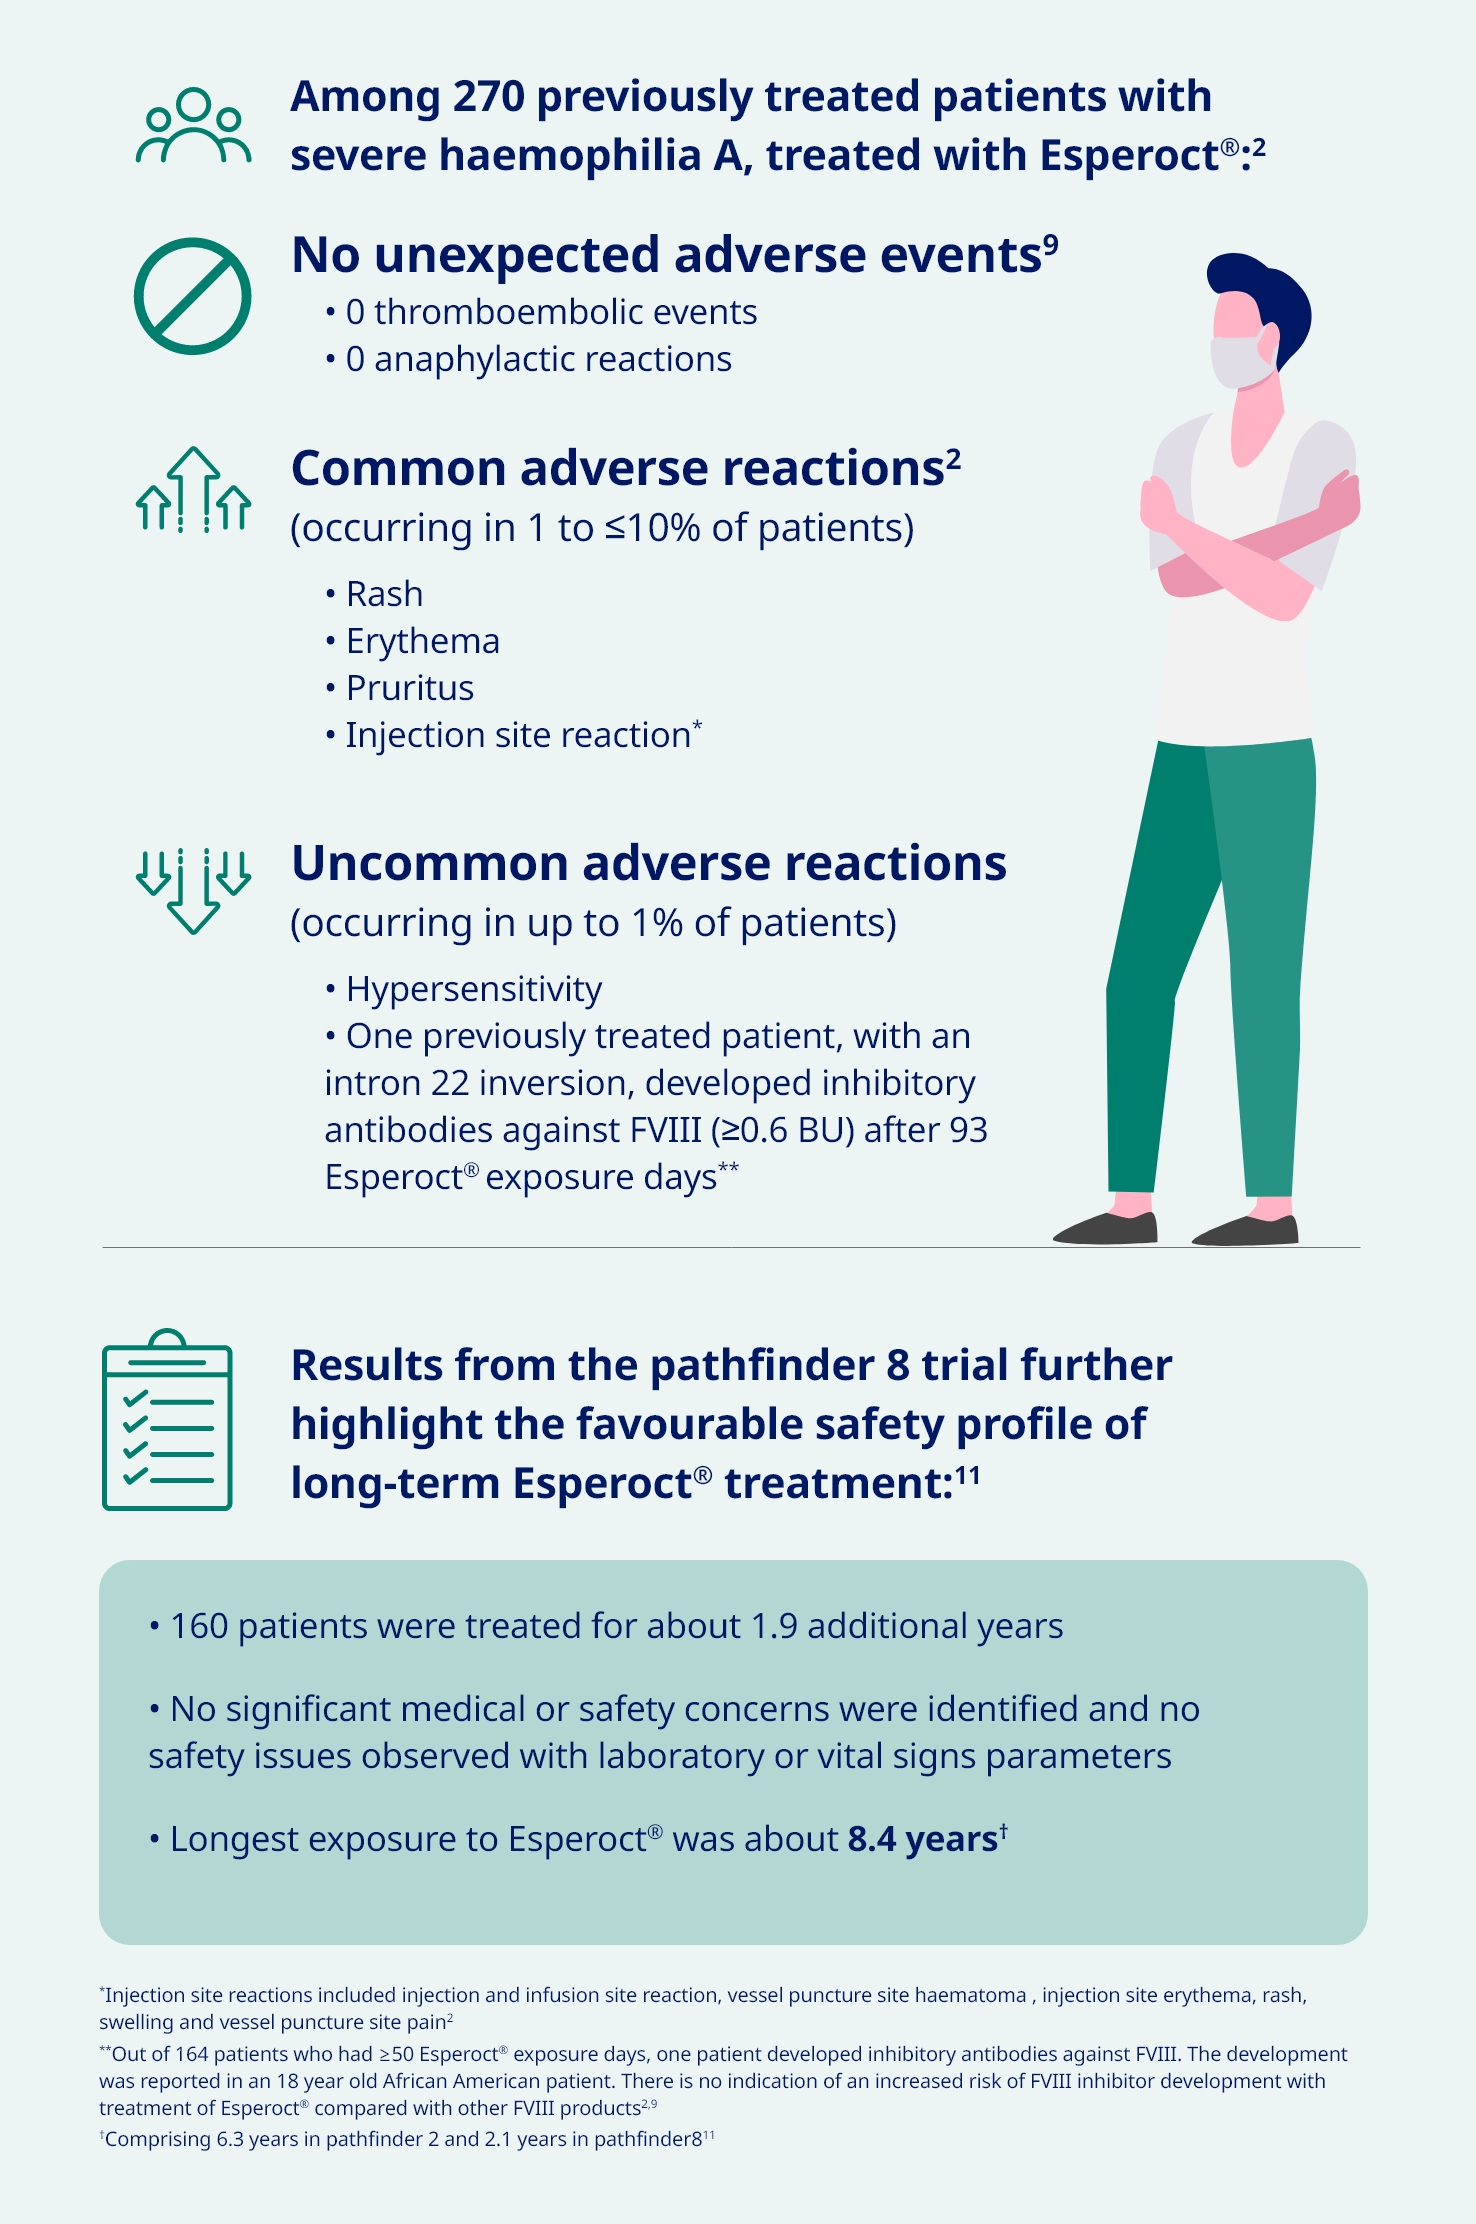 Adverse events